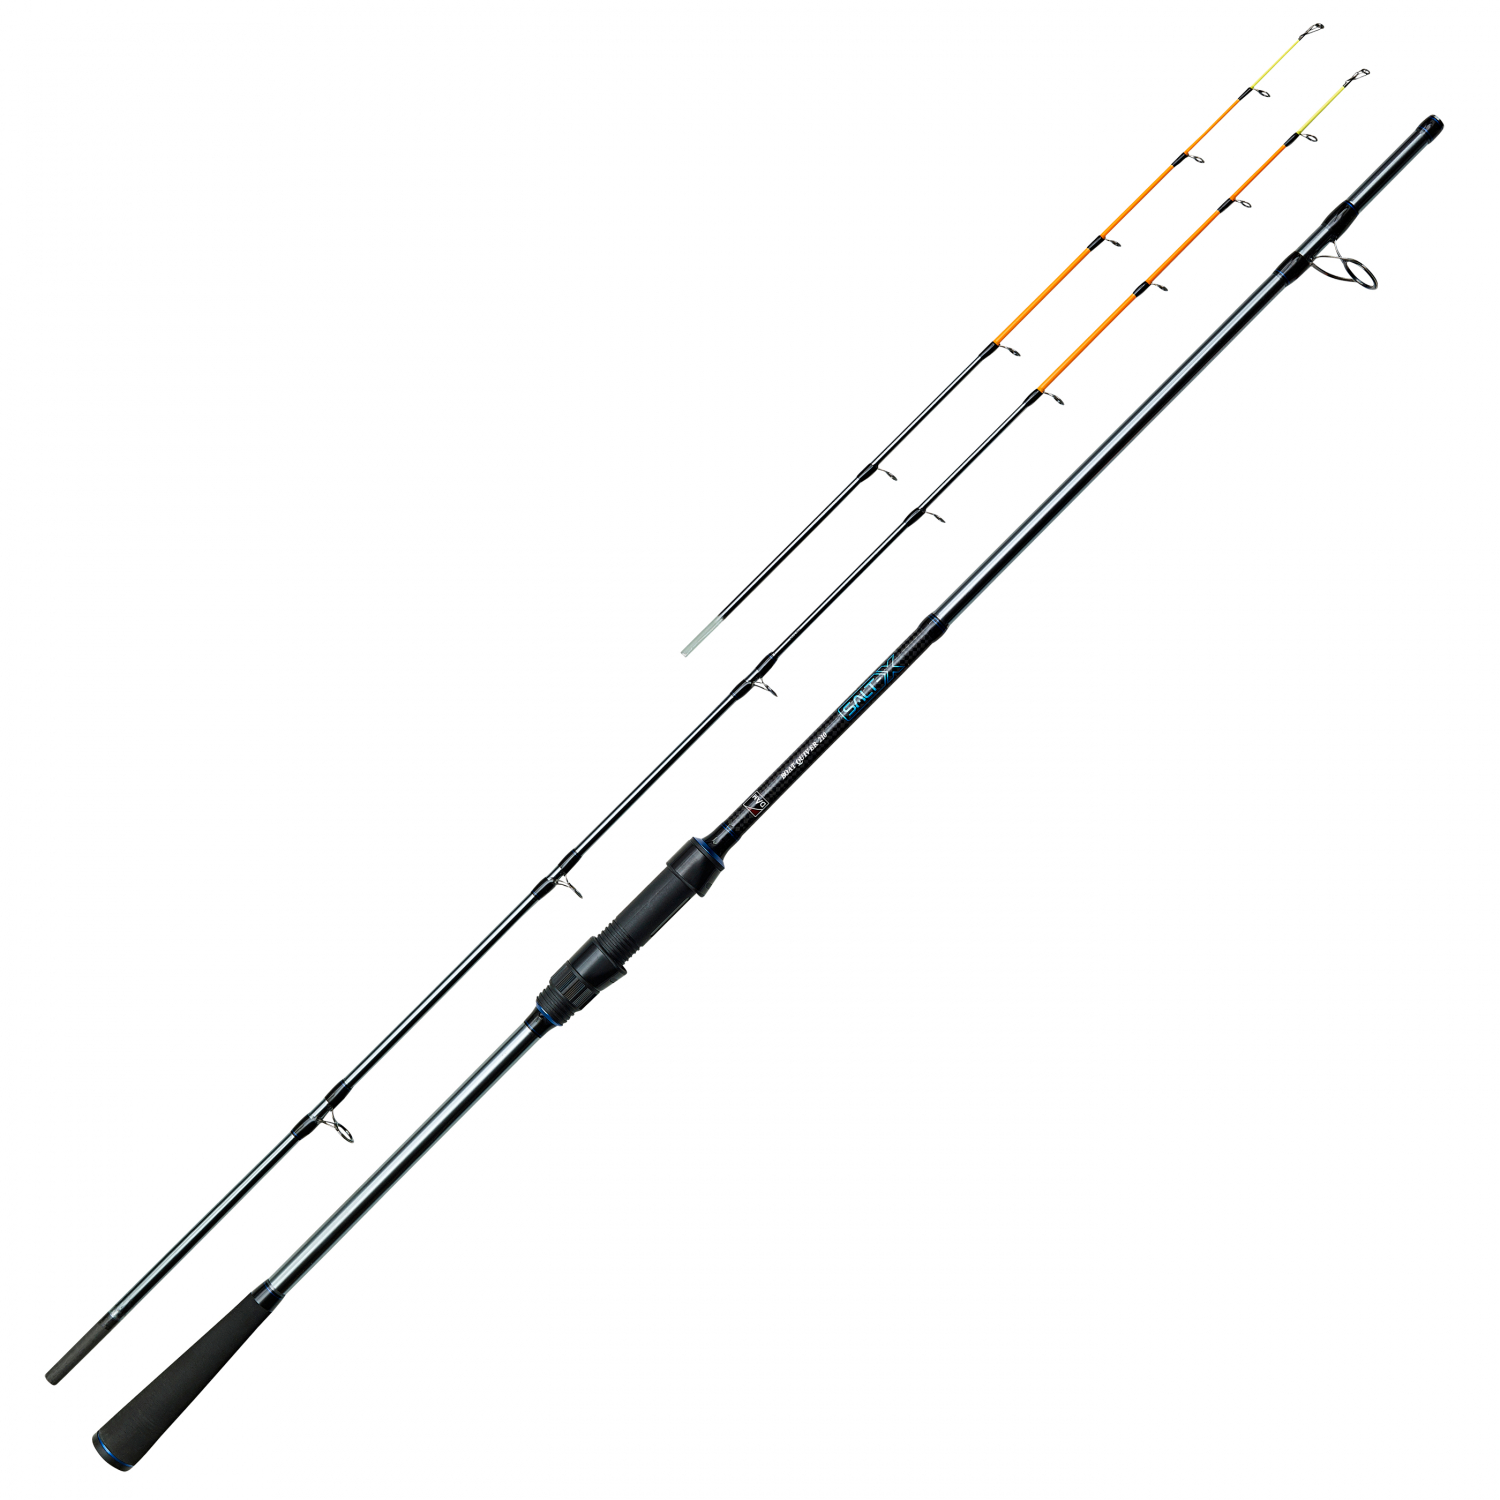 DAM Fishing Rod Salt-X Boat Quiver at low prices